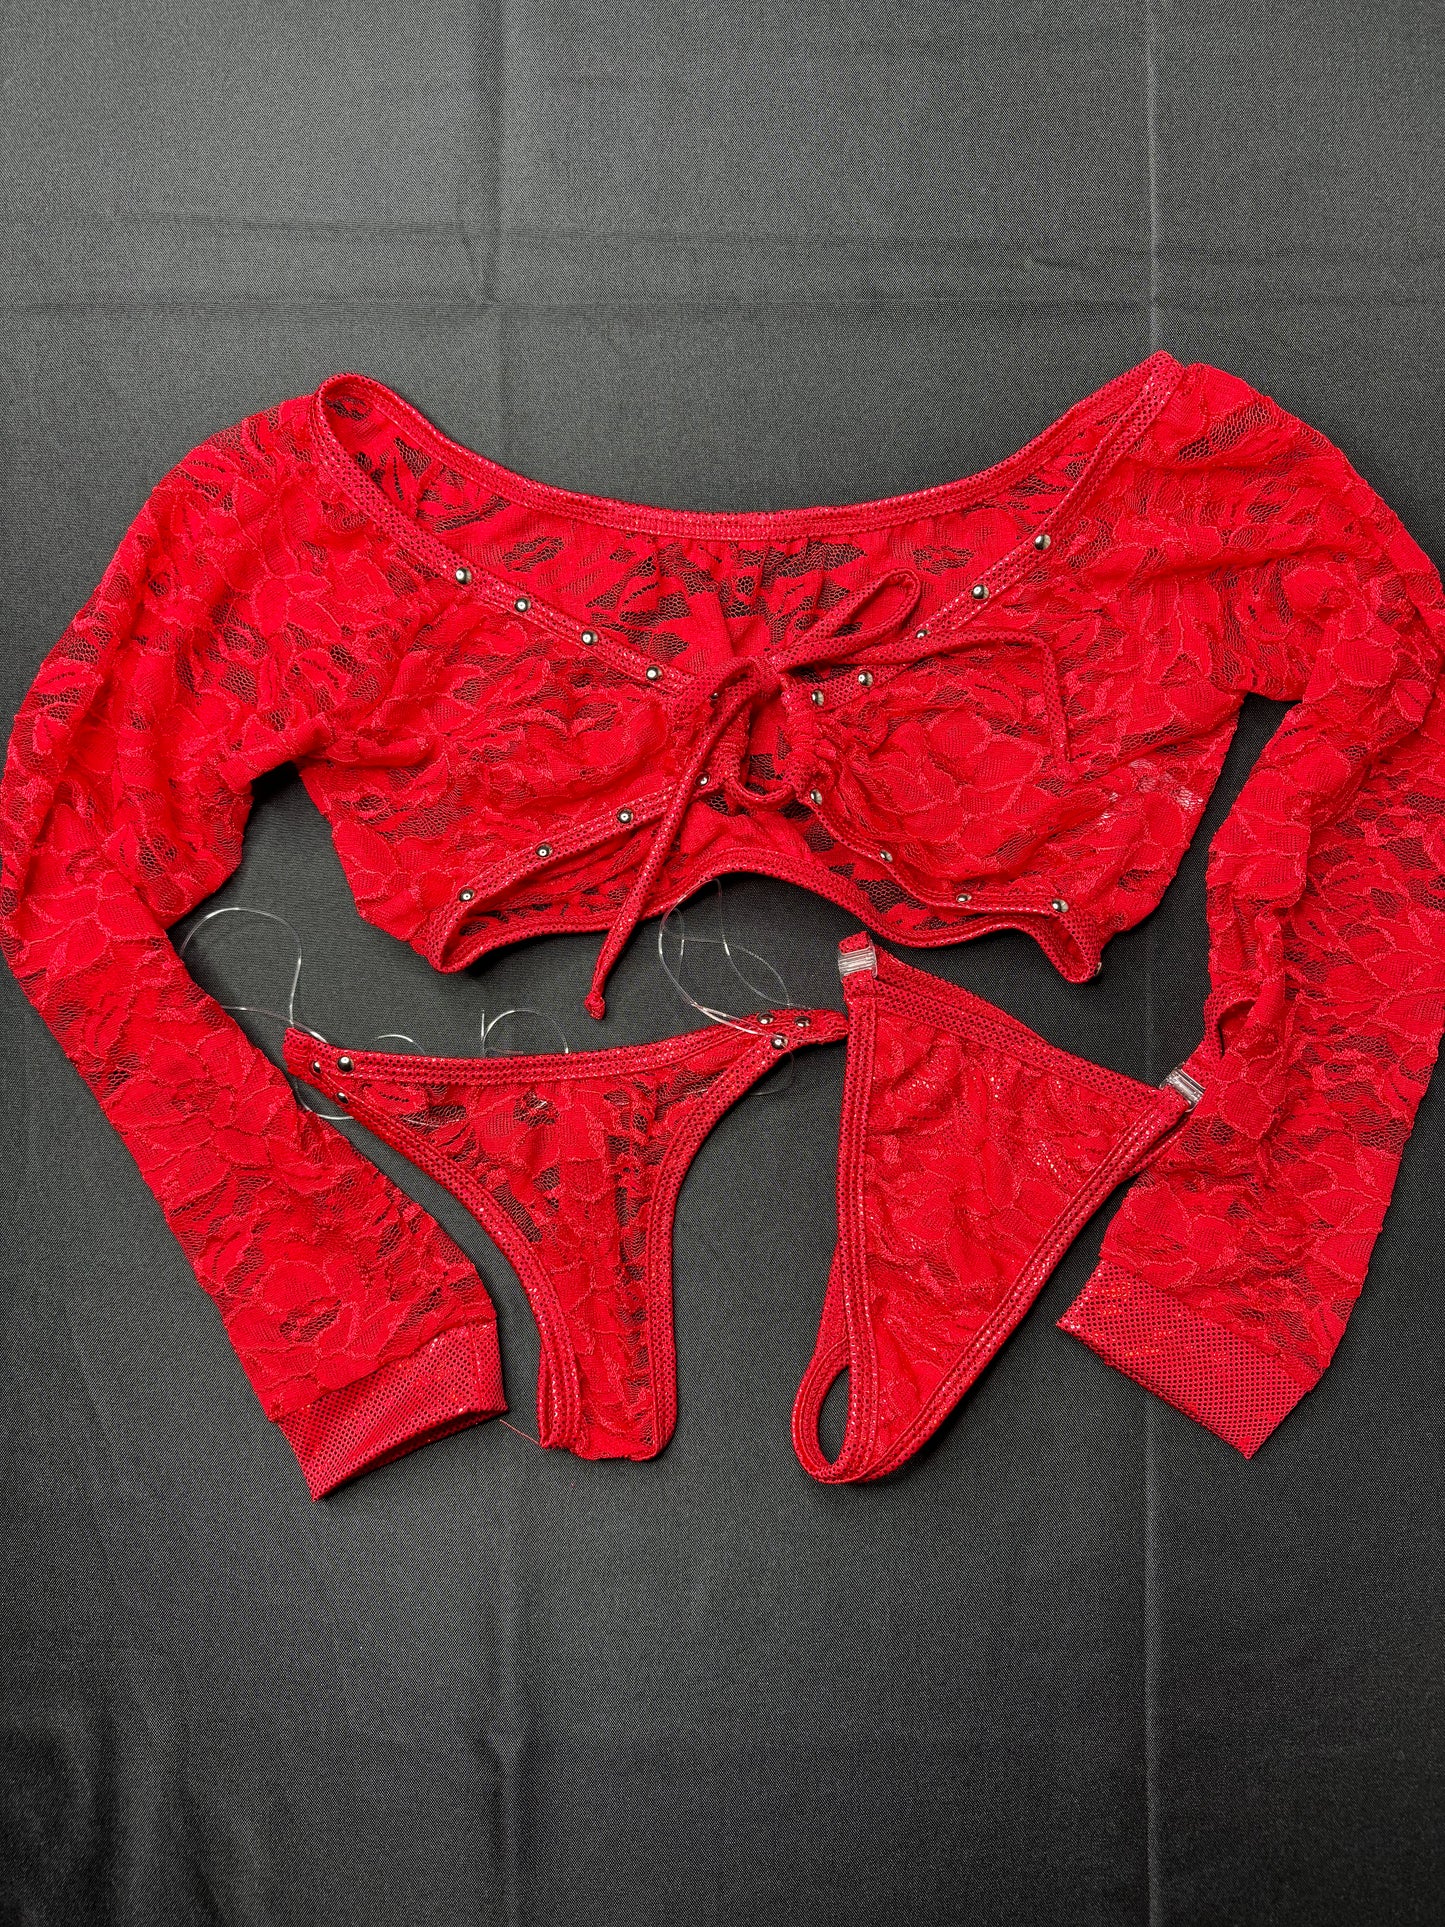 Metallic Red/Red Flower Pattern Lace Long Sleeve Valentine’s Day Exotic Dancer Outfit